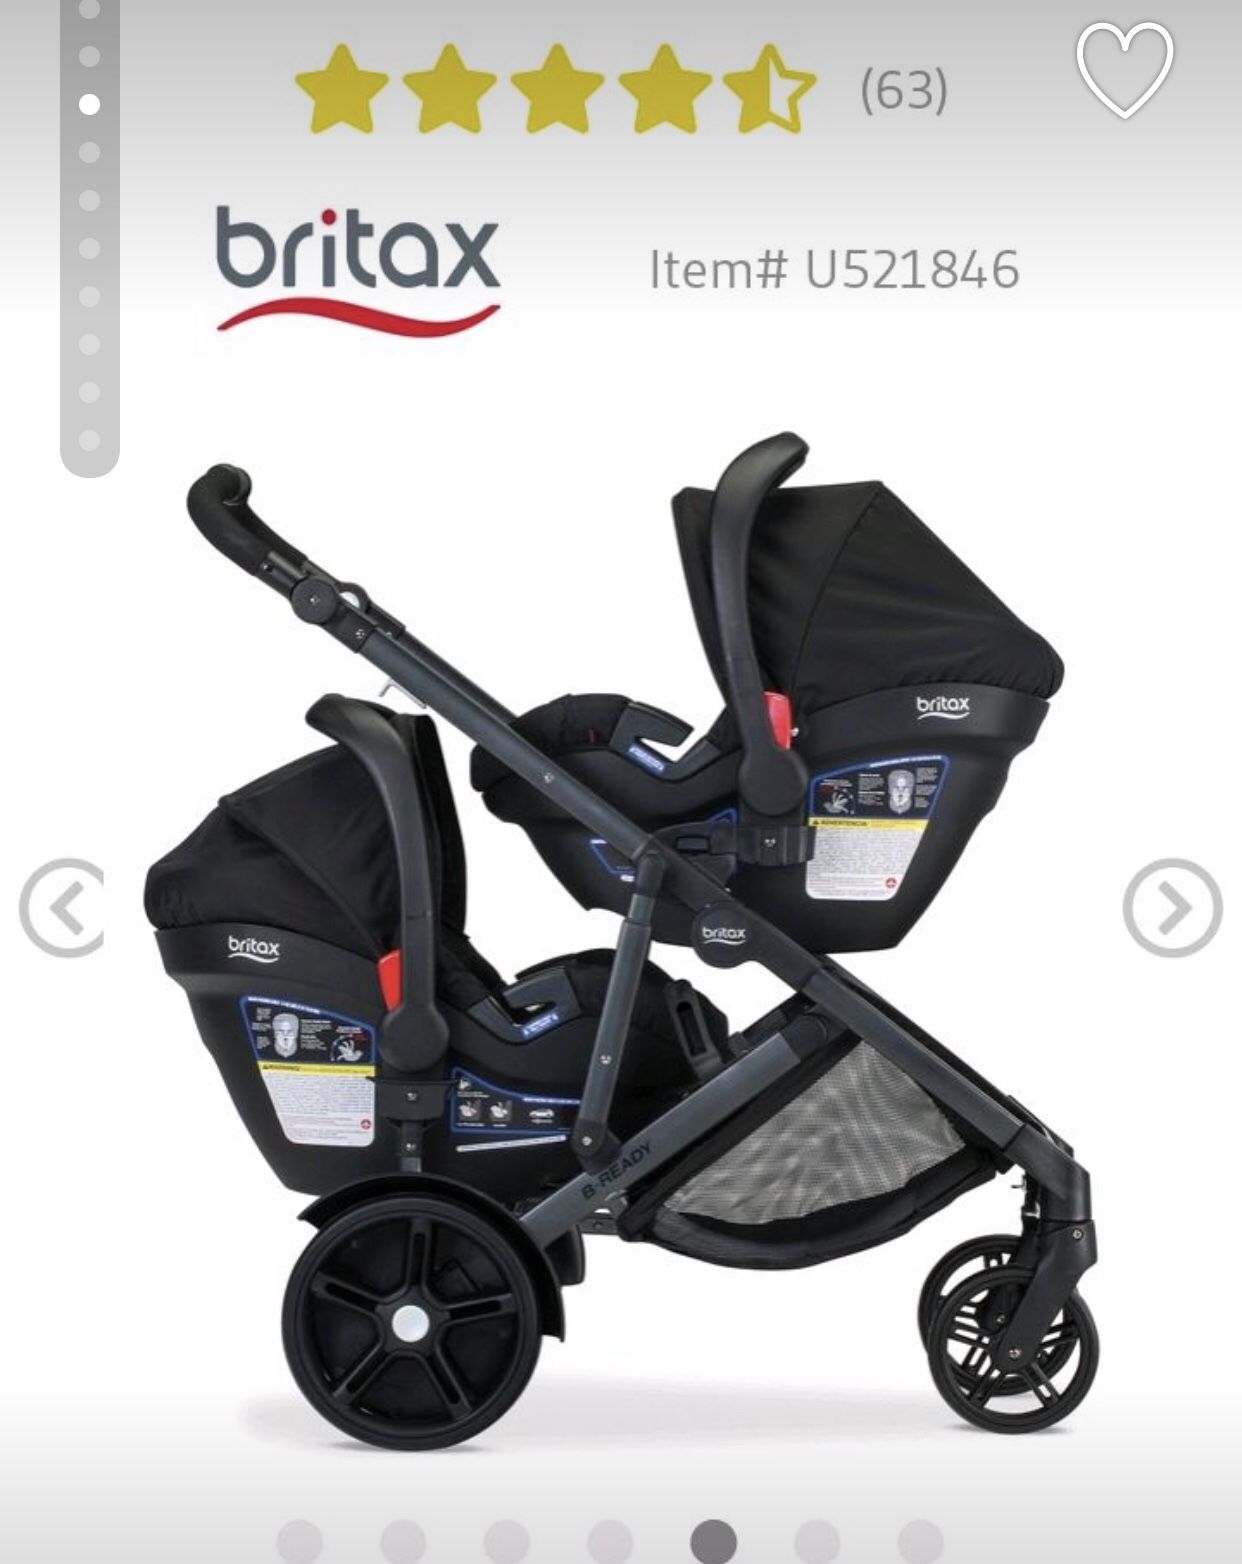 Britax B ready double stroller with 2 car seats